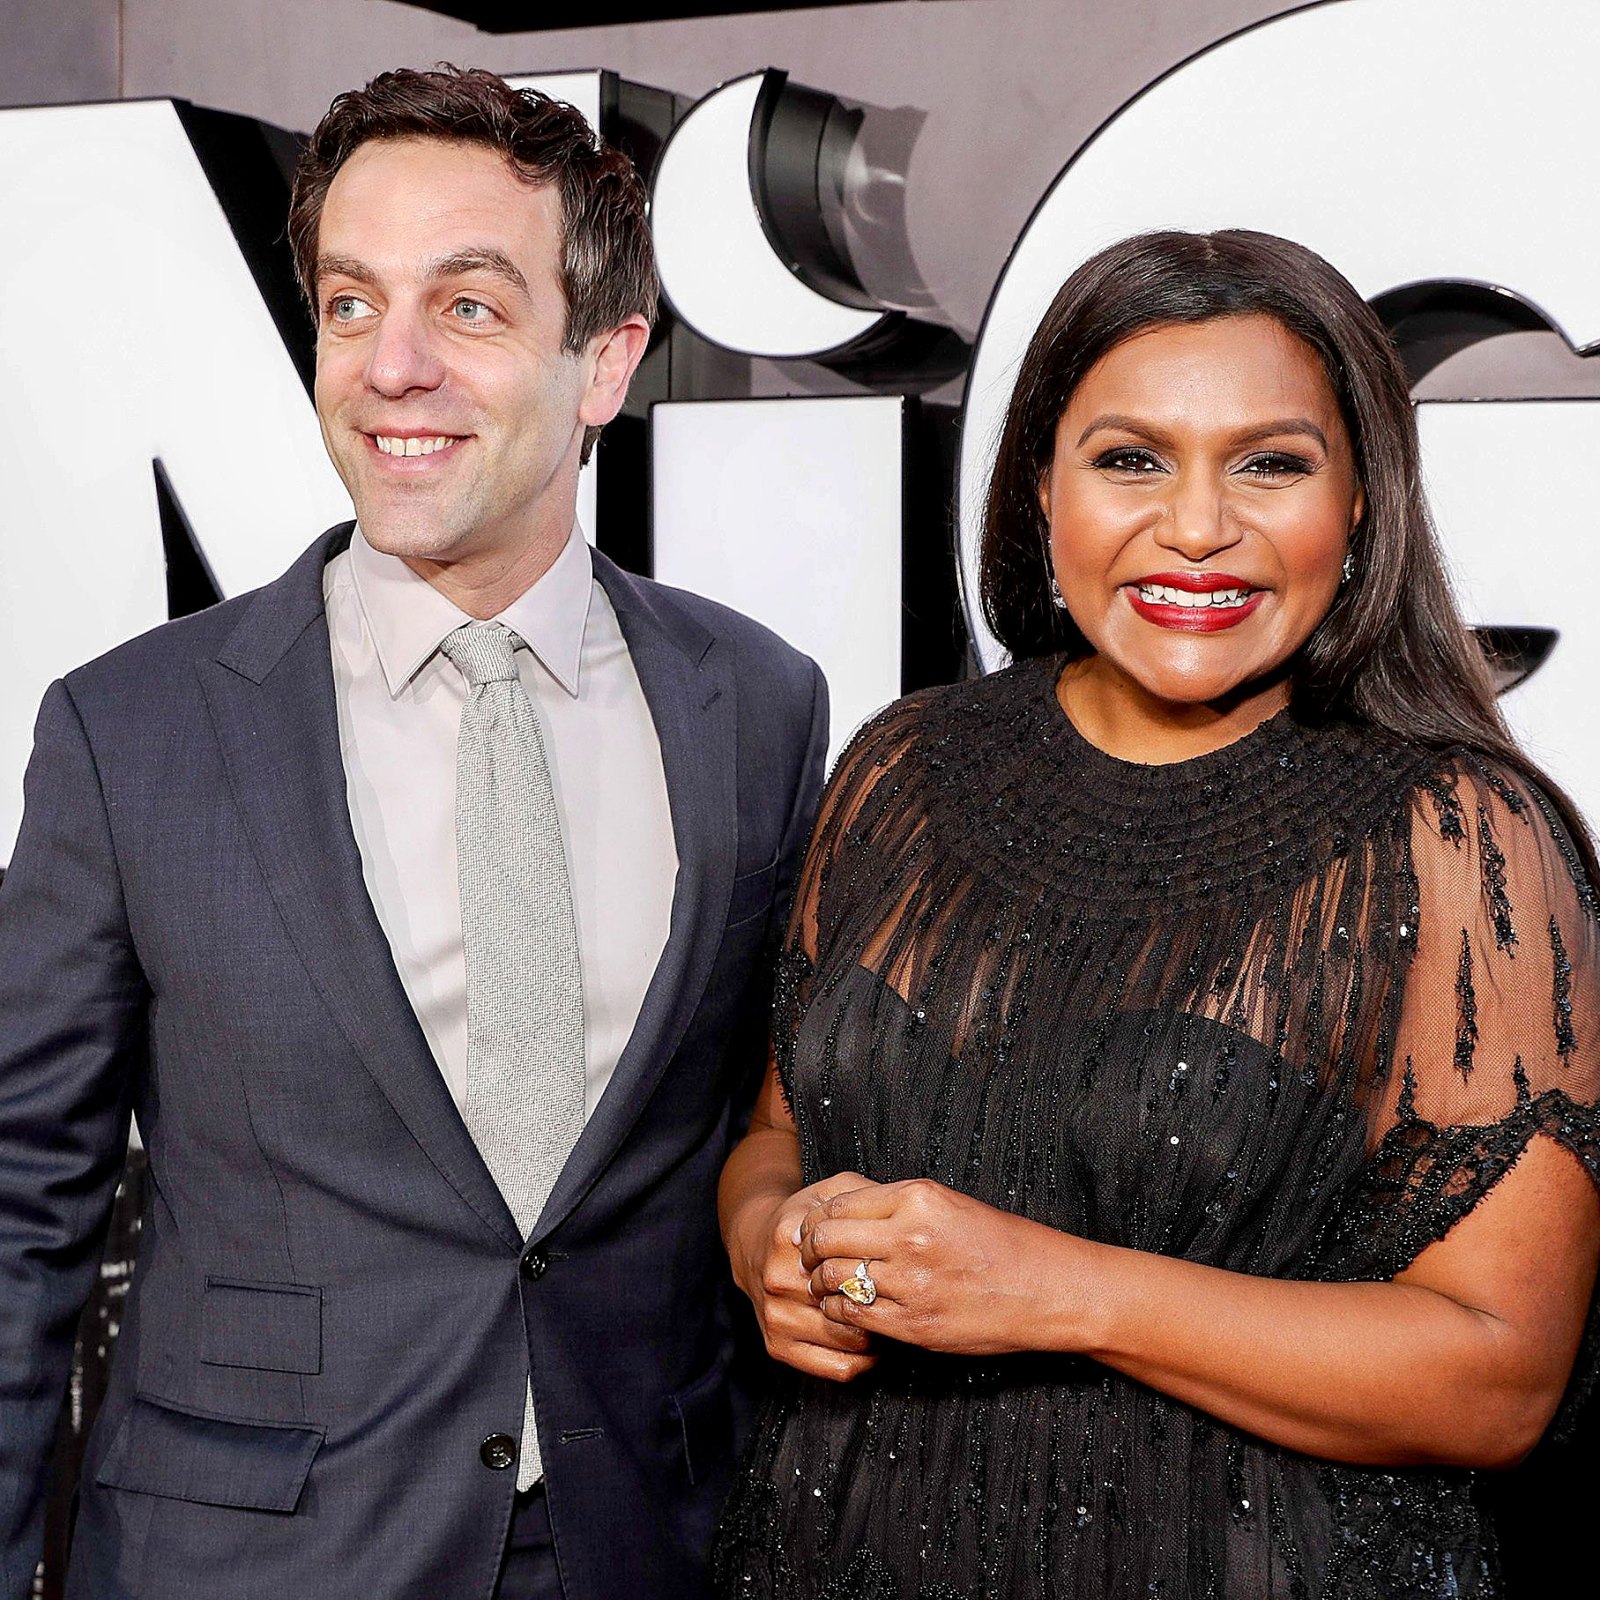 Clarifying the Speculation Mindy Kaling and BJ Novak Unbreakable Bond Through the Years